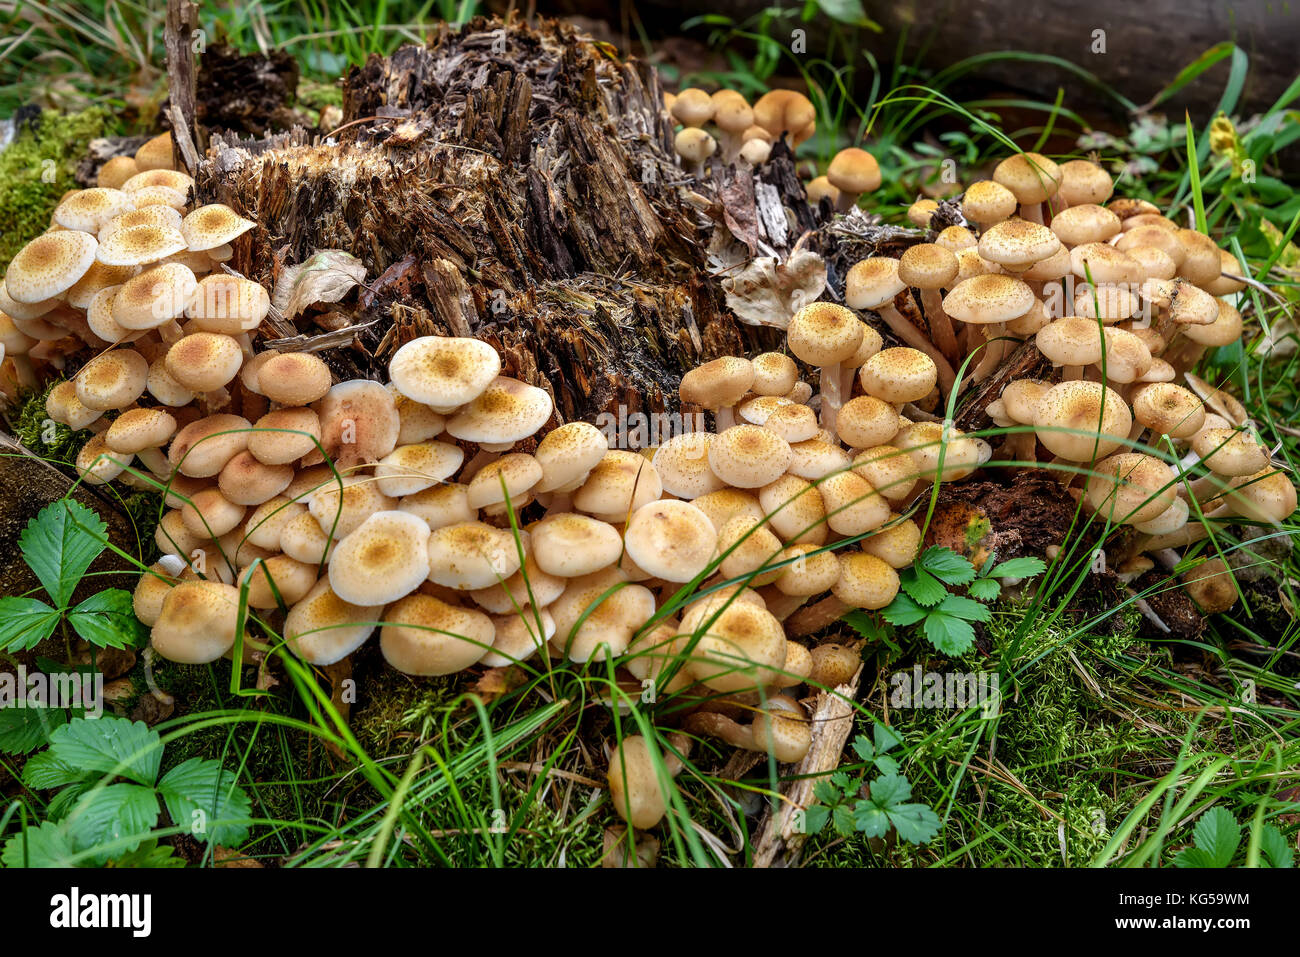 A large group of beautiful small mushrooms Honey fungus (Armillaria mellea) growing on a stump in a forest close-up Stock Photo